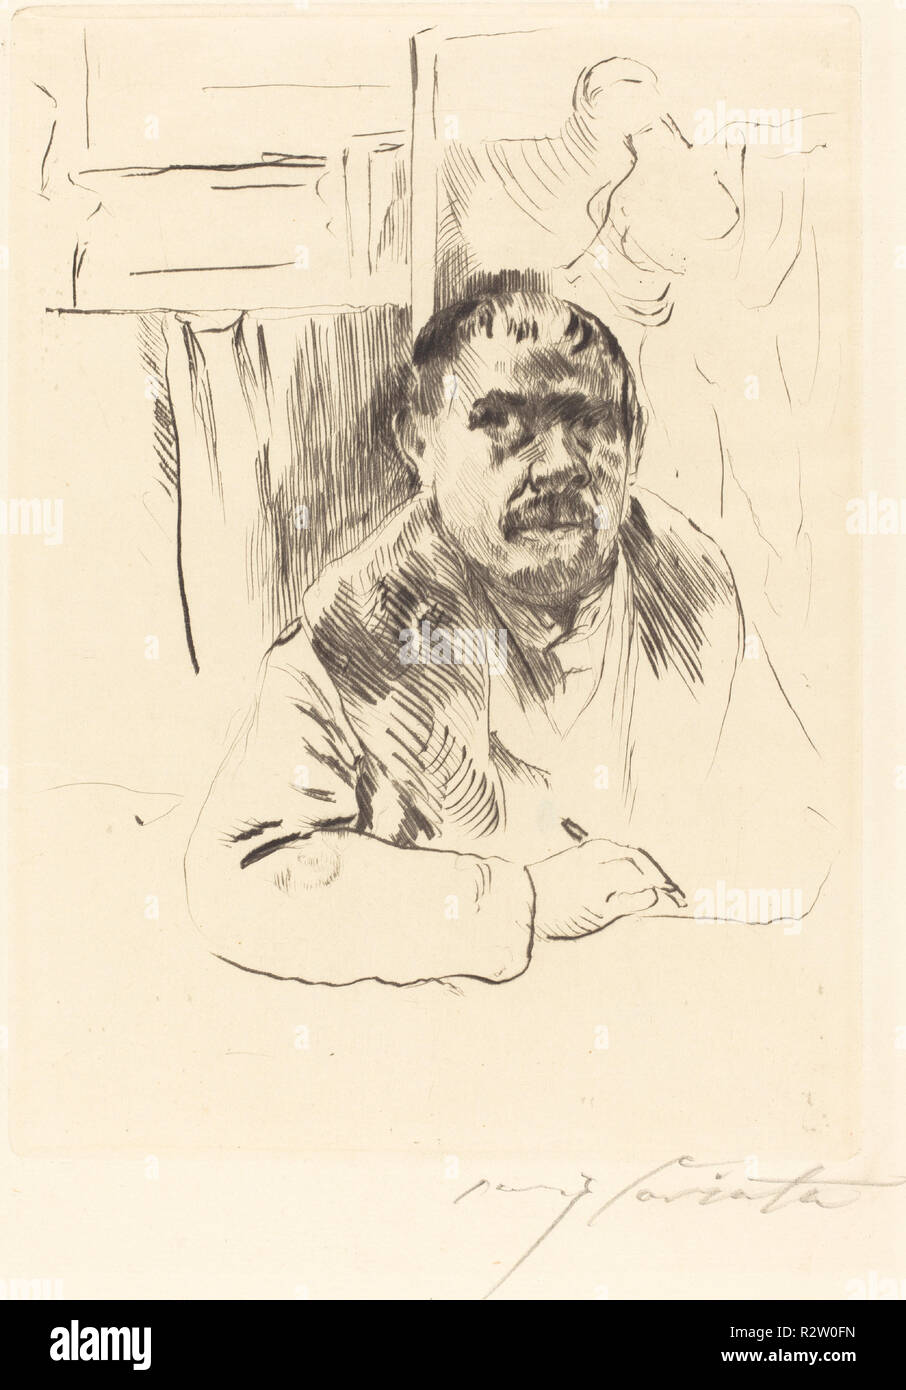 Self-Portrait in a Fur Coat (Selbstbildnis im Pelz). Dated: 1913. Dimensions: plate: 21.7 x 16 cm (8 9/16 x 6 5/16 in.)  sheet: 41.9 x 27.1 cm (16 1/2 x 10 11/16 in.). Medium: drypoint in black on laid paper. Museum: National Gallery of Art, Washington DC. Author: Lovis Corinth. Stock Photo